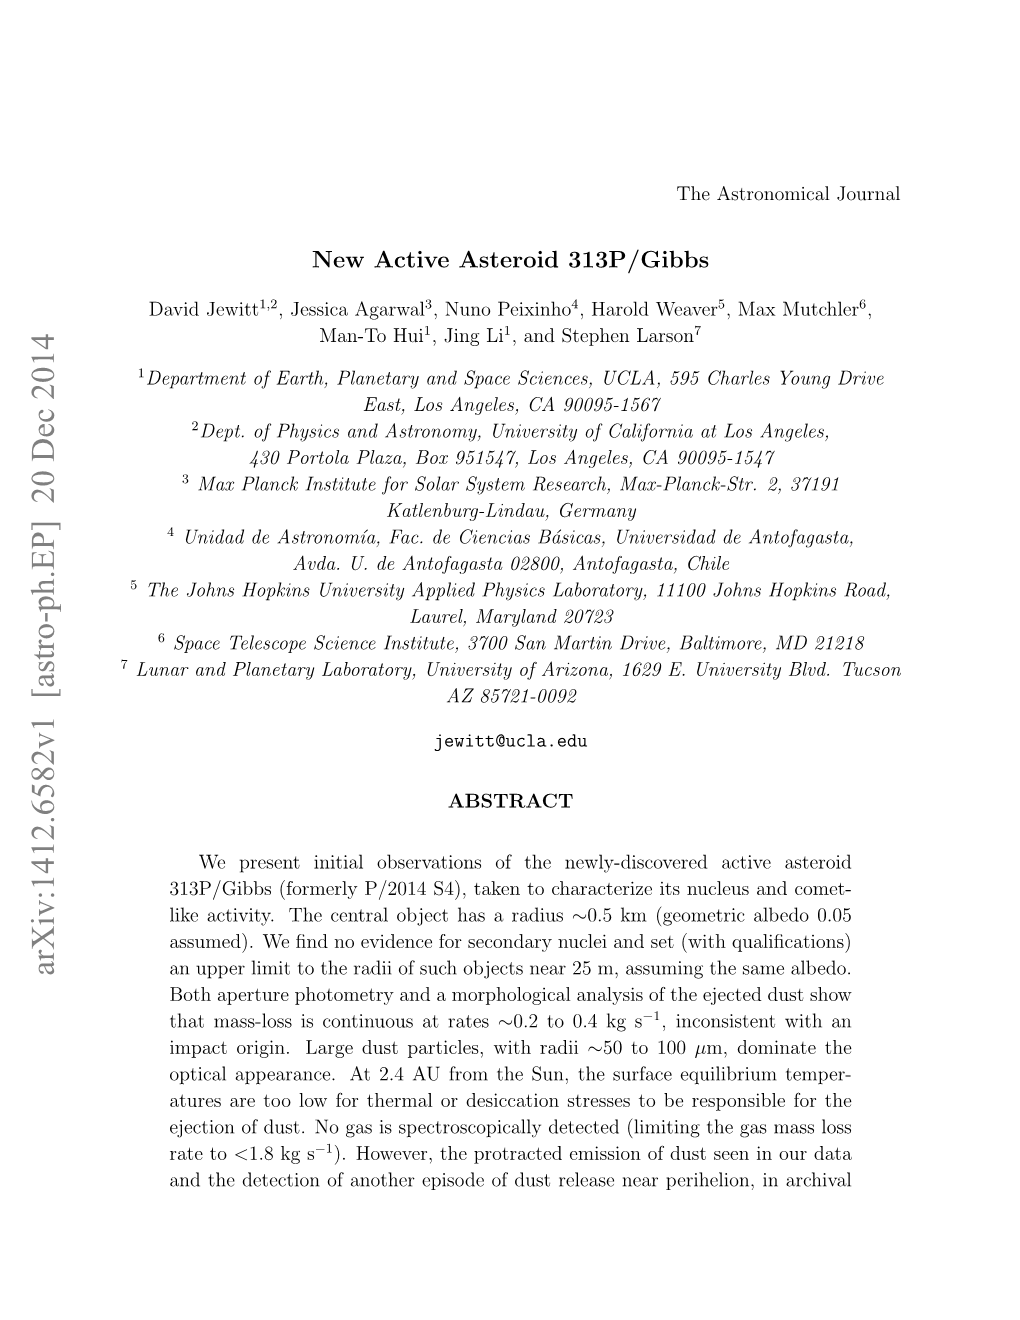 Arxiv:1412.6582V1 [Astro-Ph.EP] 20 Dec 2014 an Upper Limit to the Radii of Such Objects Near 25 M, Assuming the Same Albedo